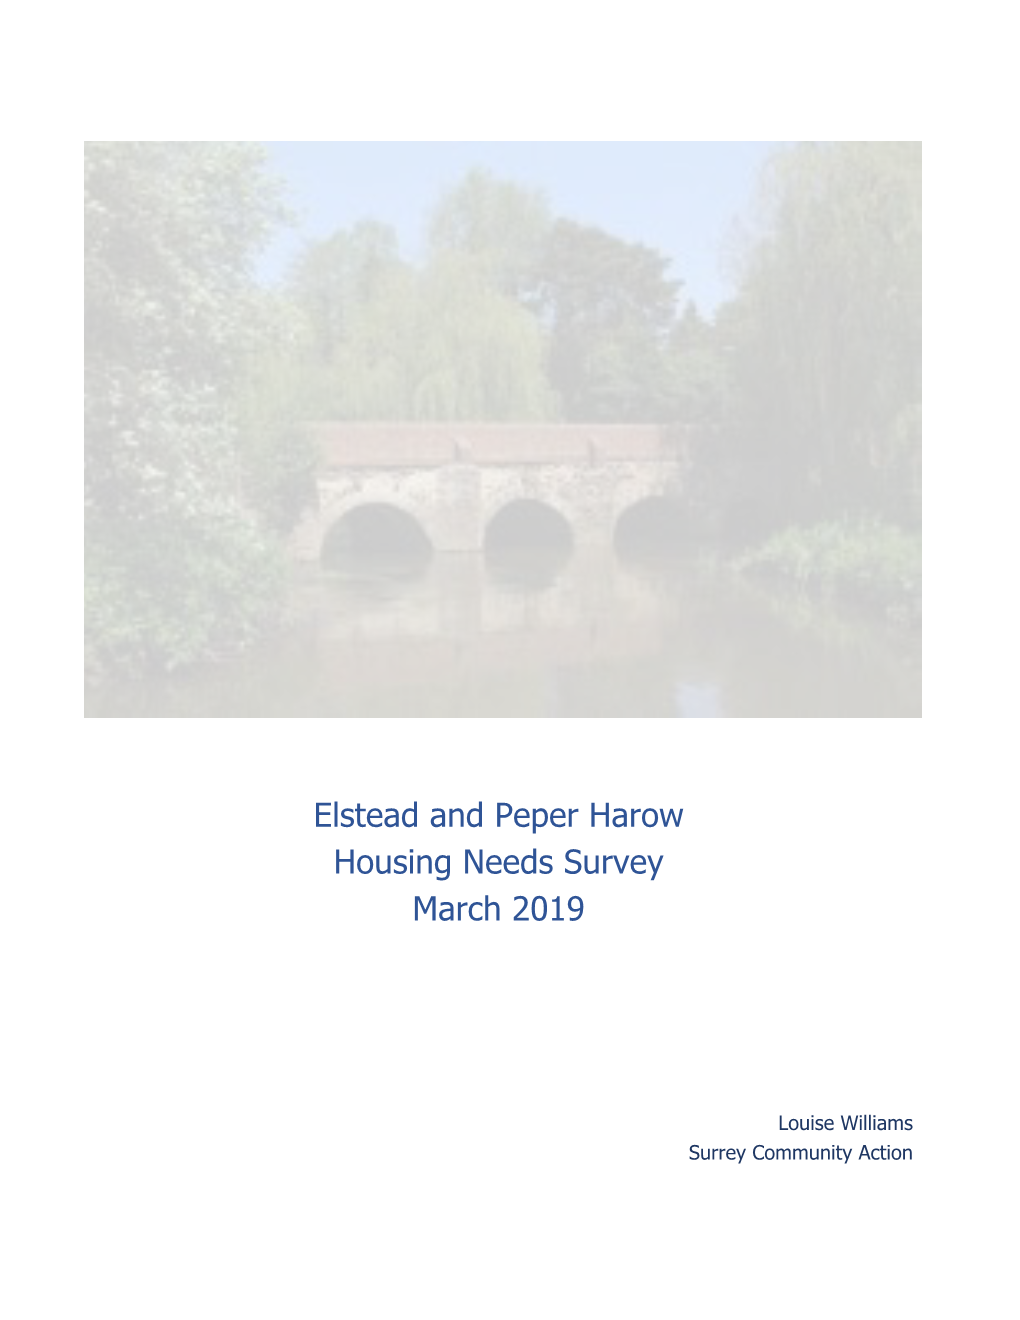 Elstead and Peper Harow Housing Needs Survey March 2019